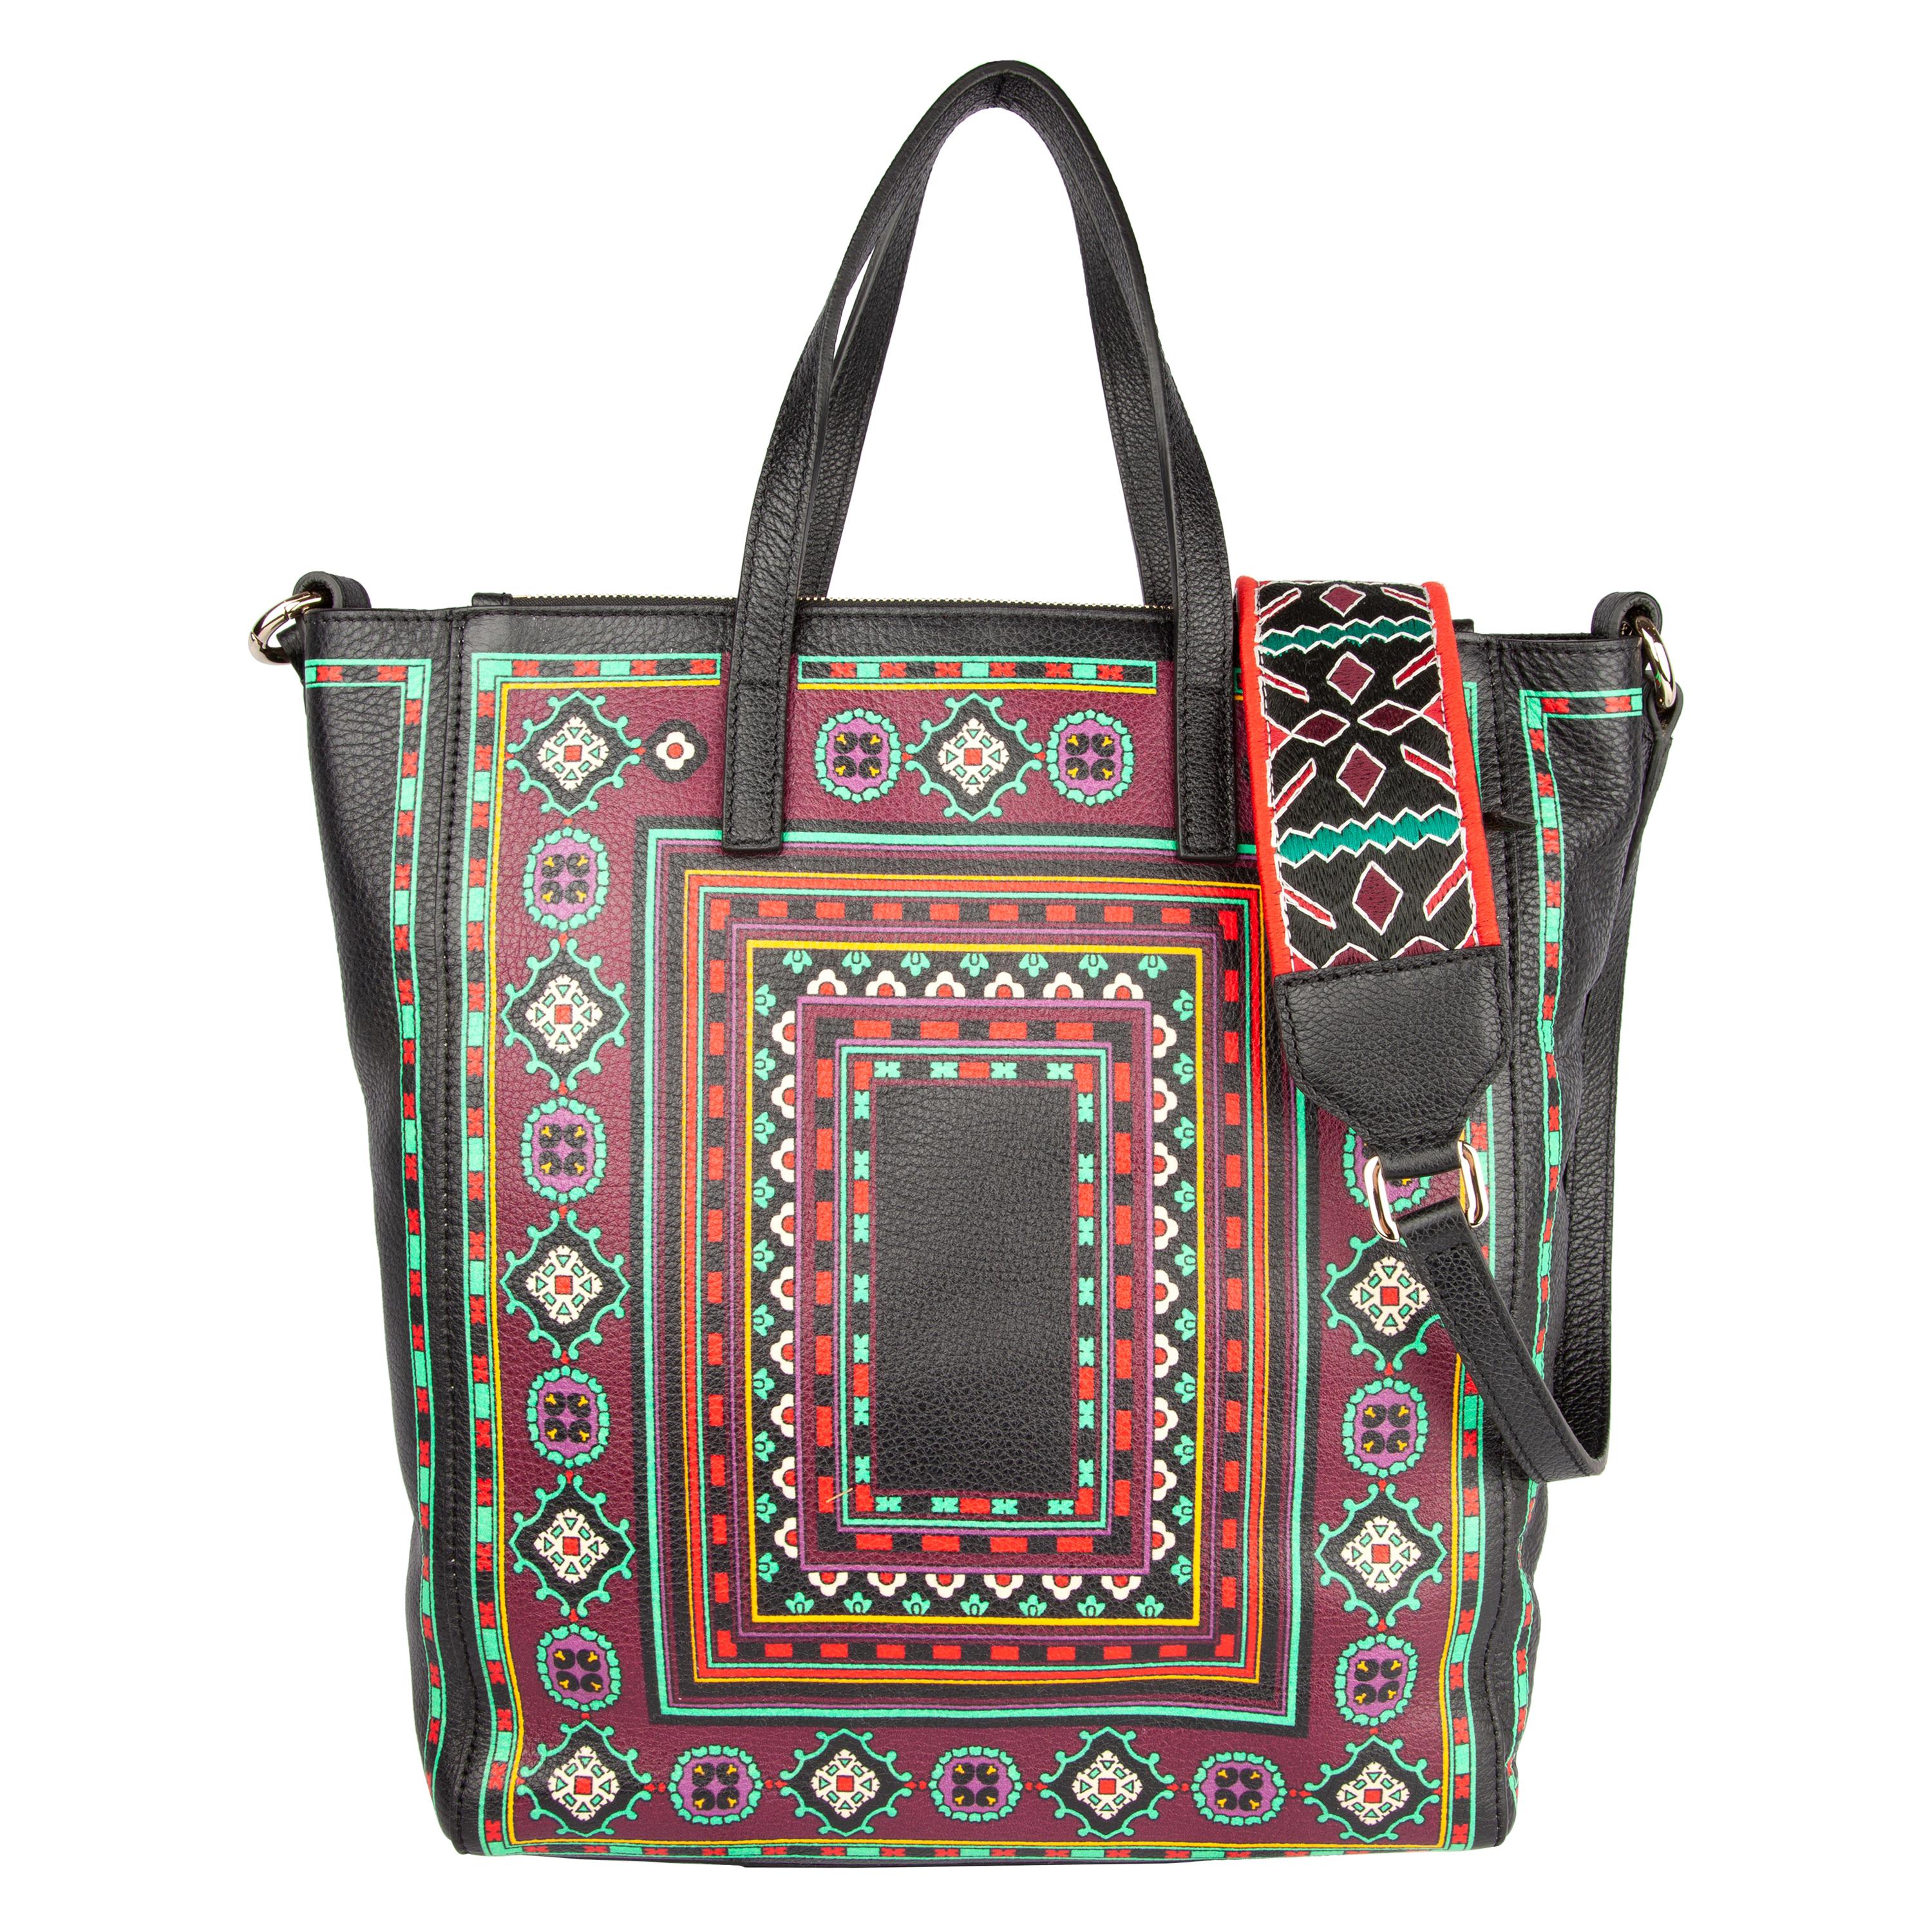 Etro Medium Southwestern Print Leather Shopping Tote with Embroidered Strap